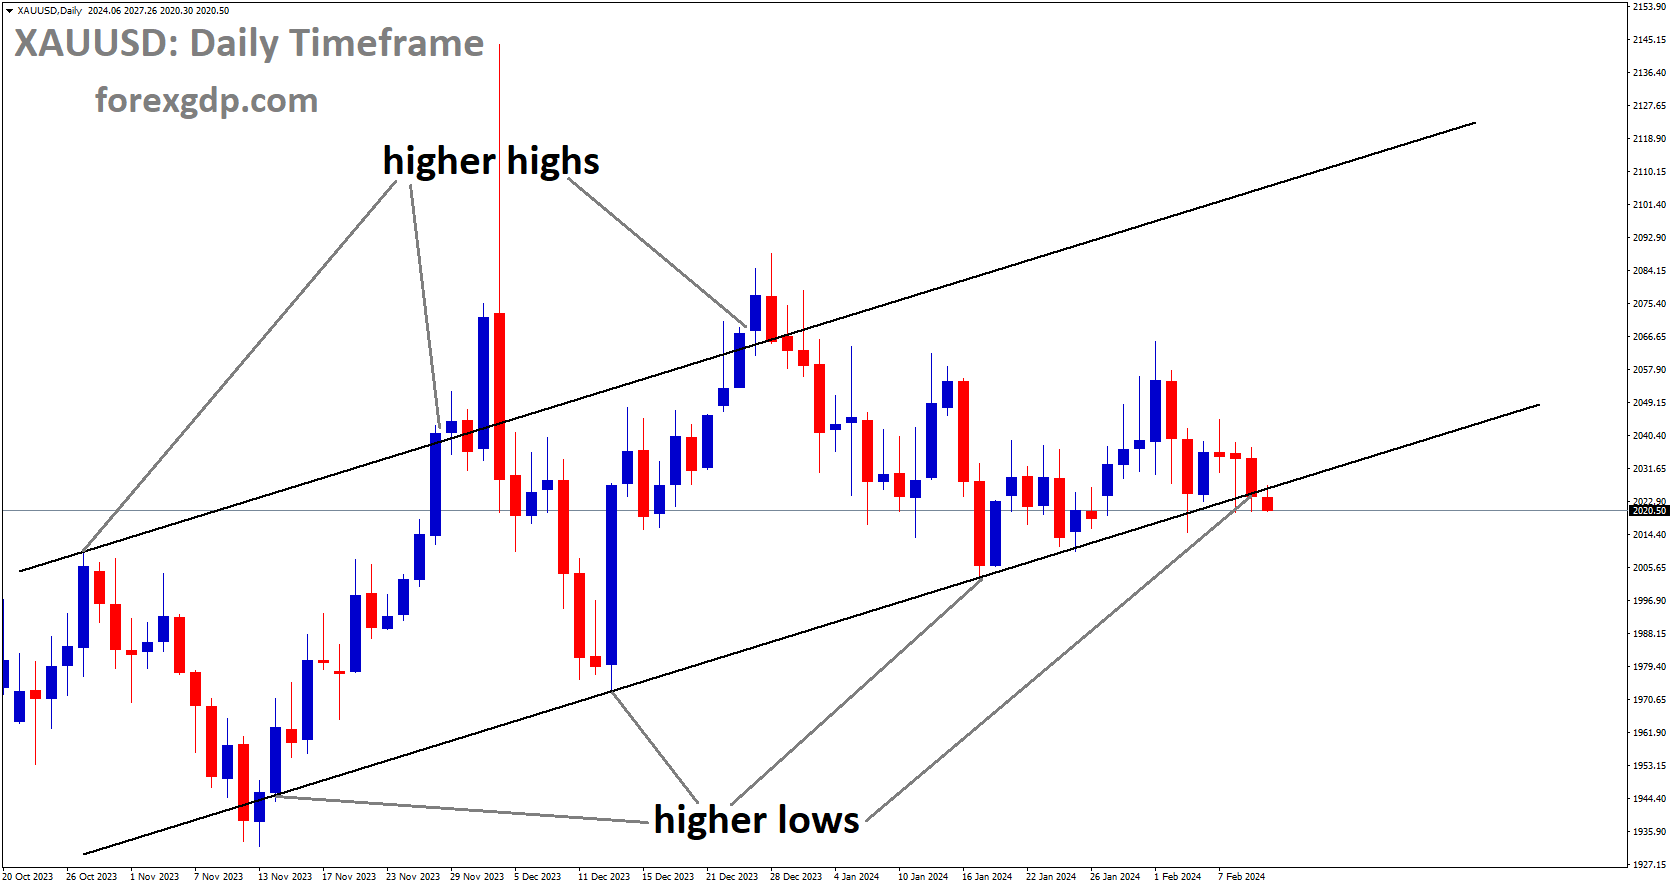 XAUUSD is moving in Ascending channel and market has reached higher low area of the channel